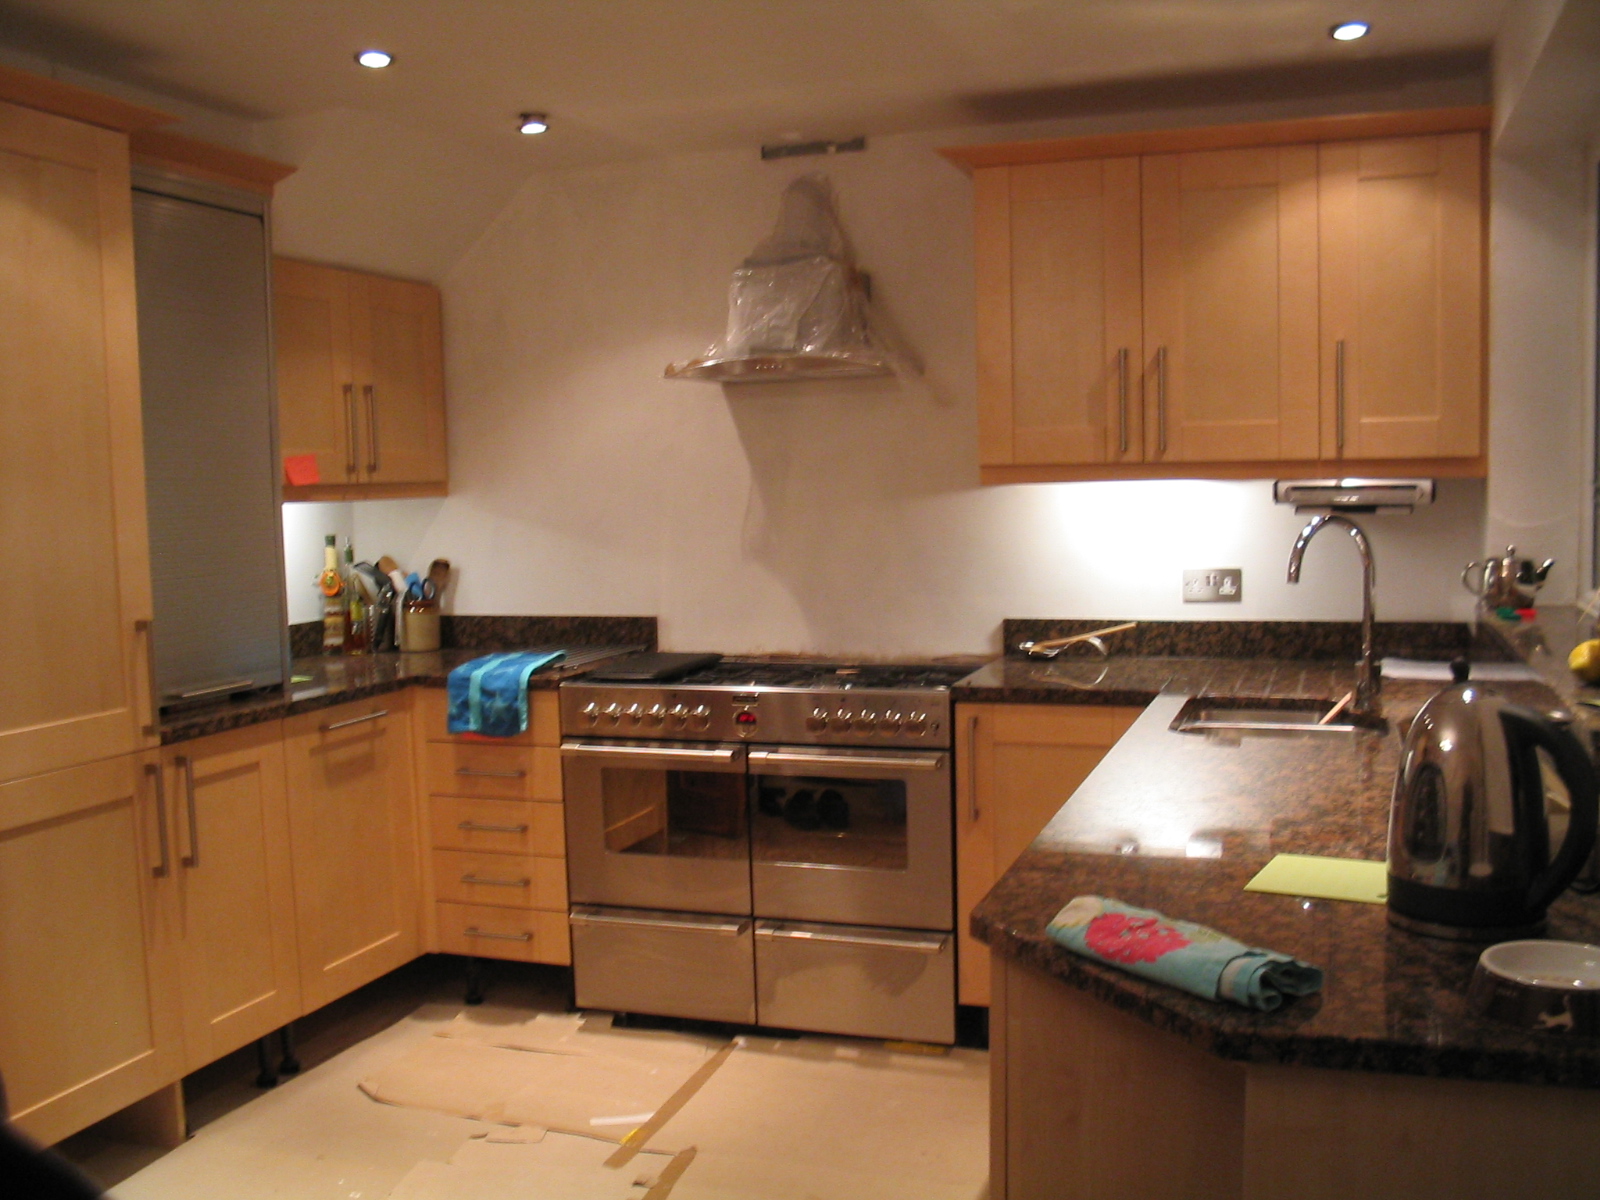 [kitchen+nearly+there.jpg]